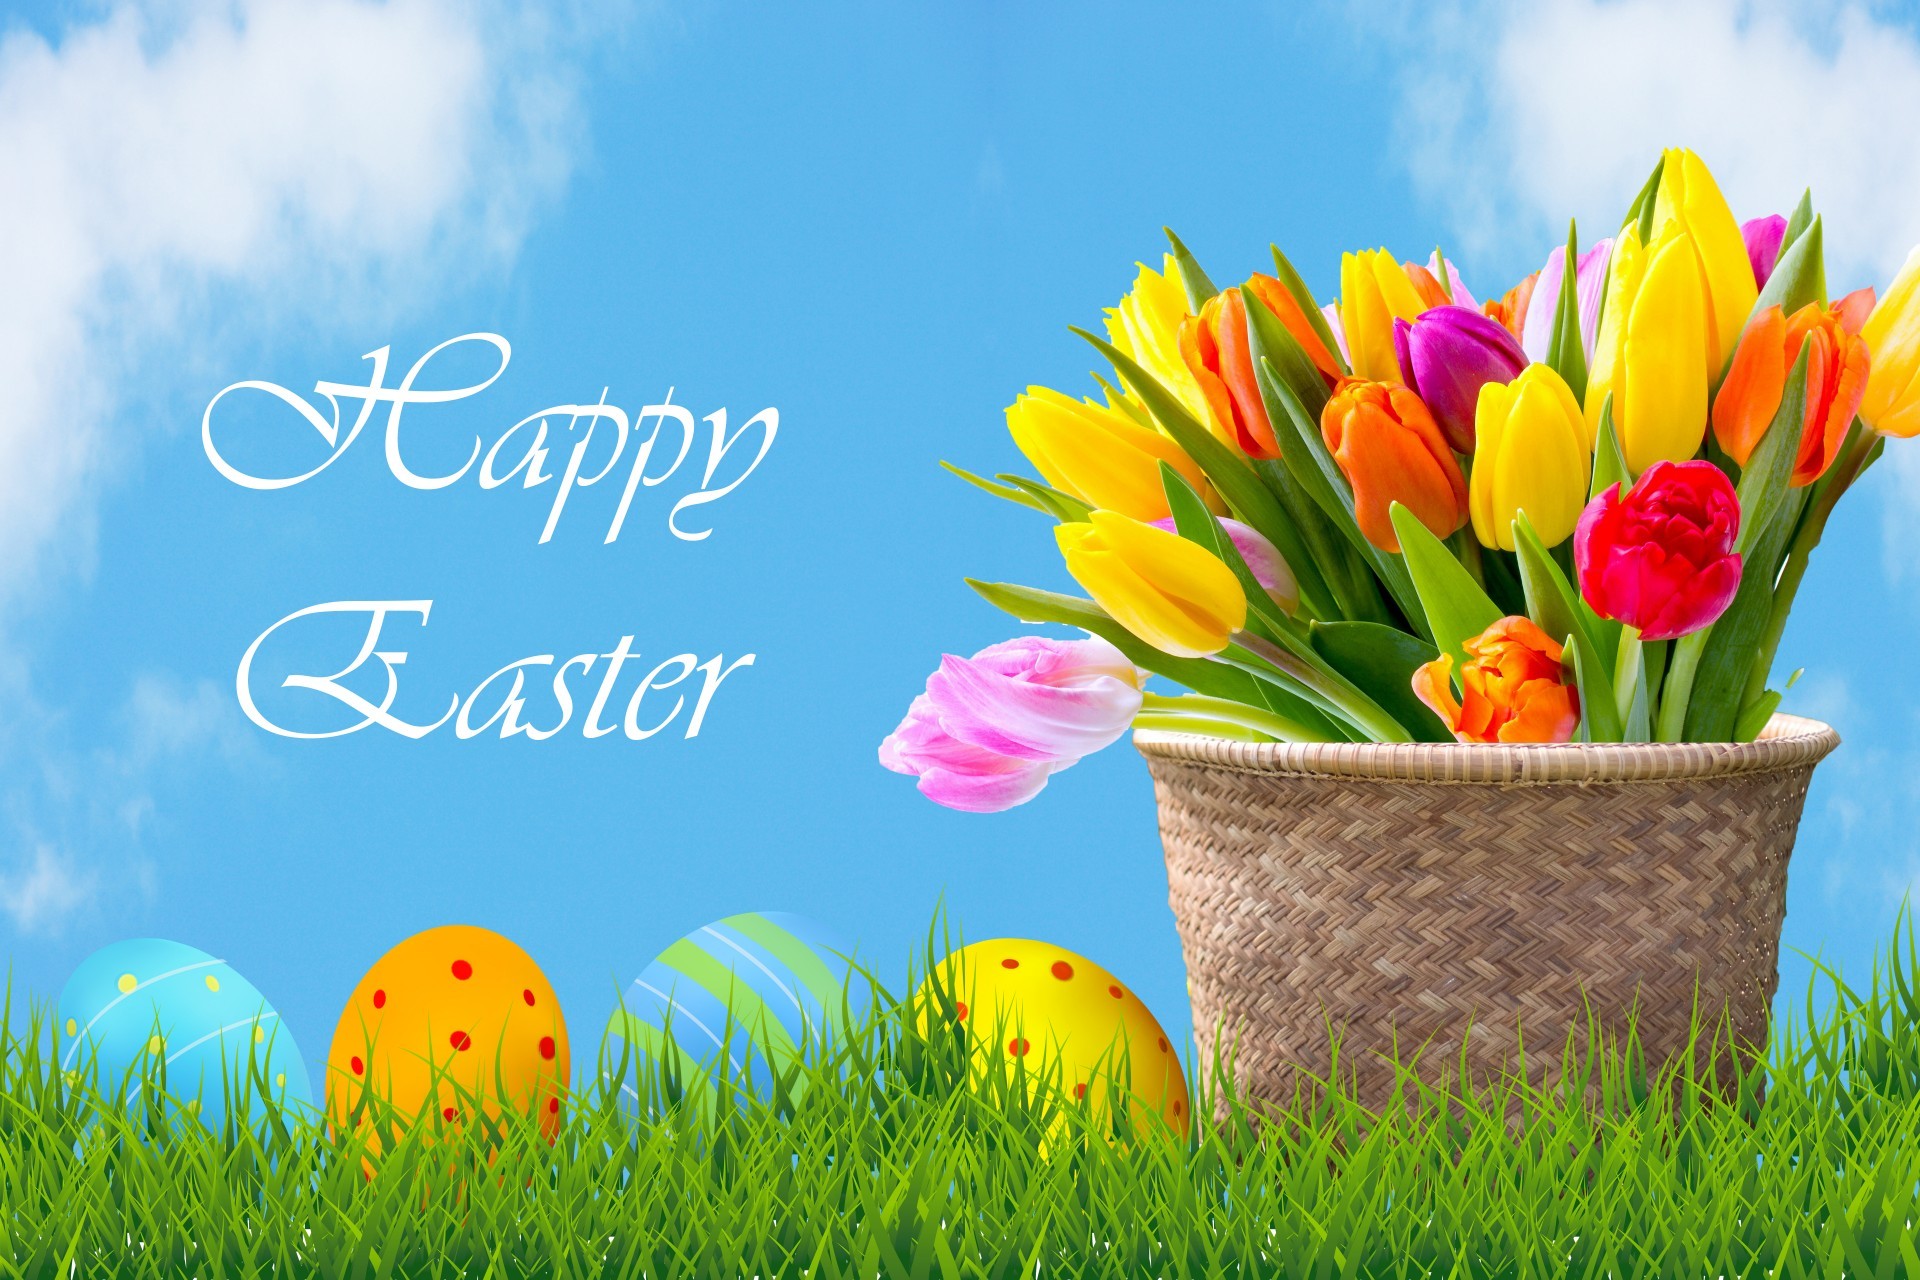 Sunday Wallpaper - Happy Easter Images 2019 , HD Wallpaper & Backgrounds